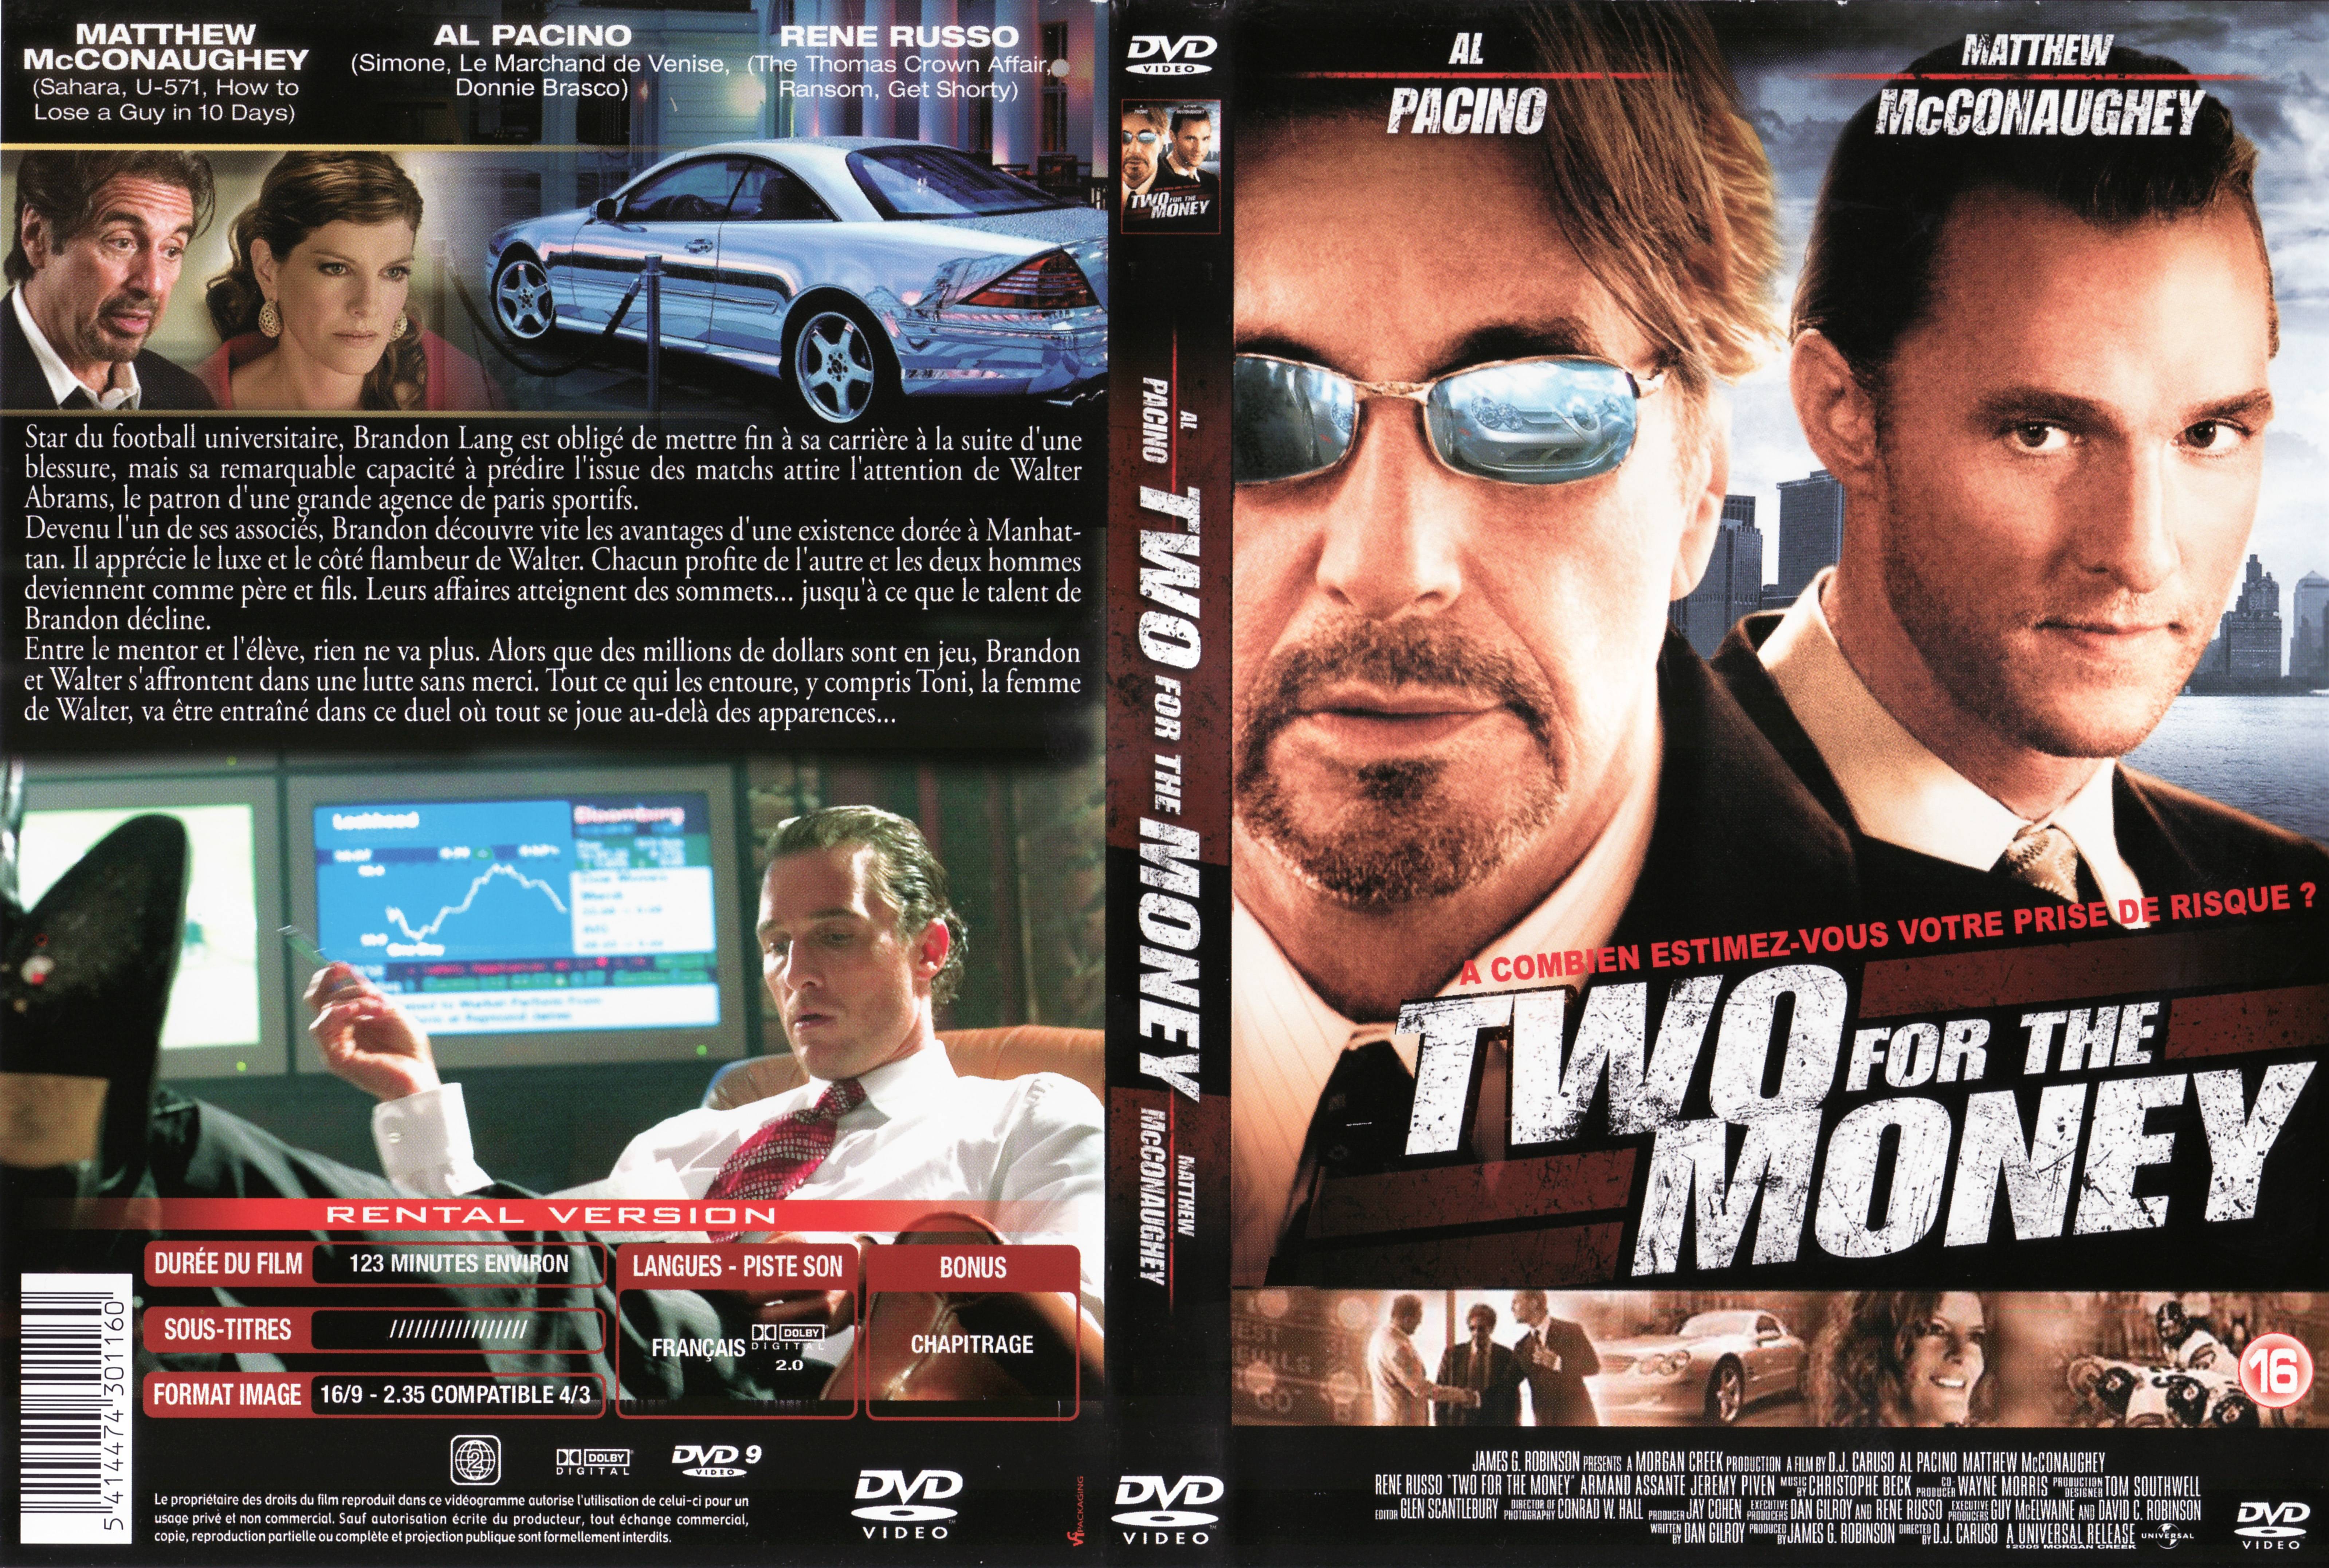 Jaquette DVD Two for the money v2